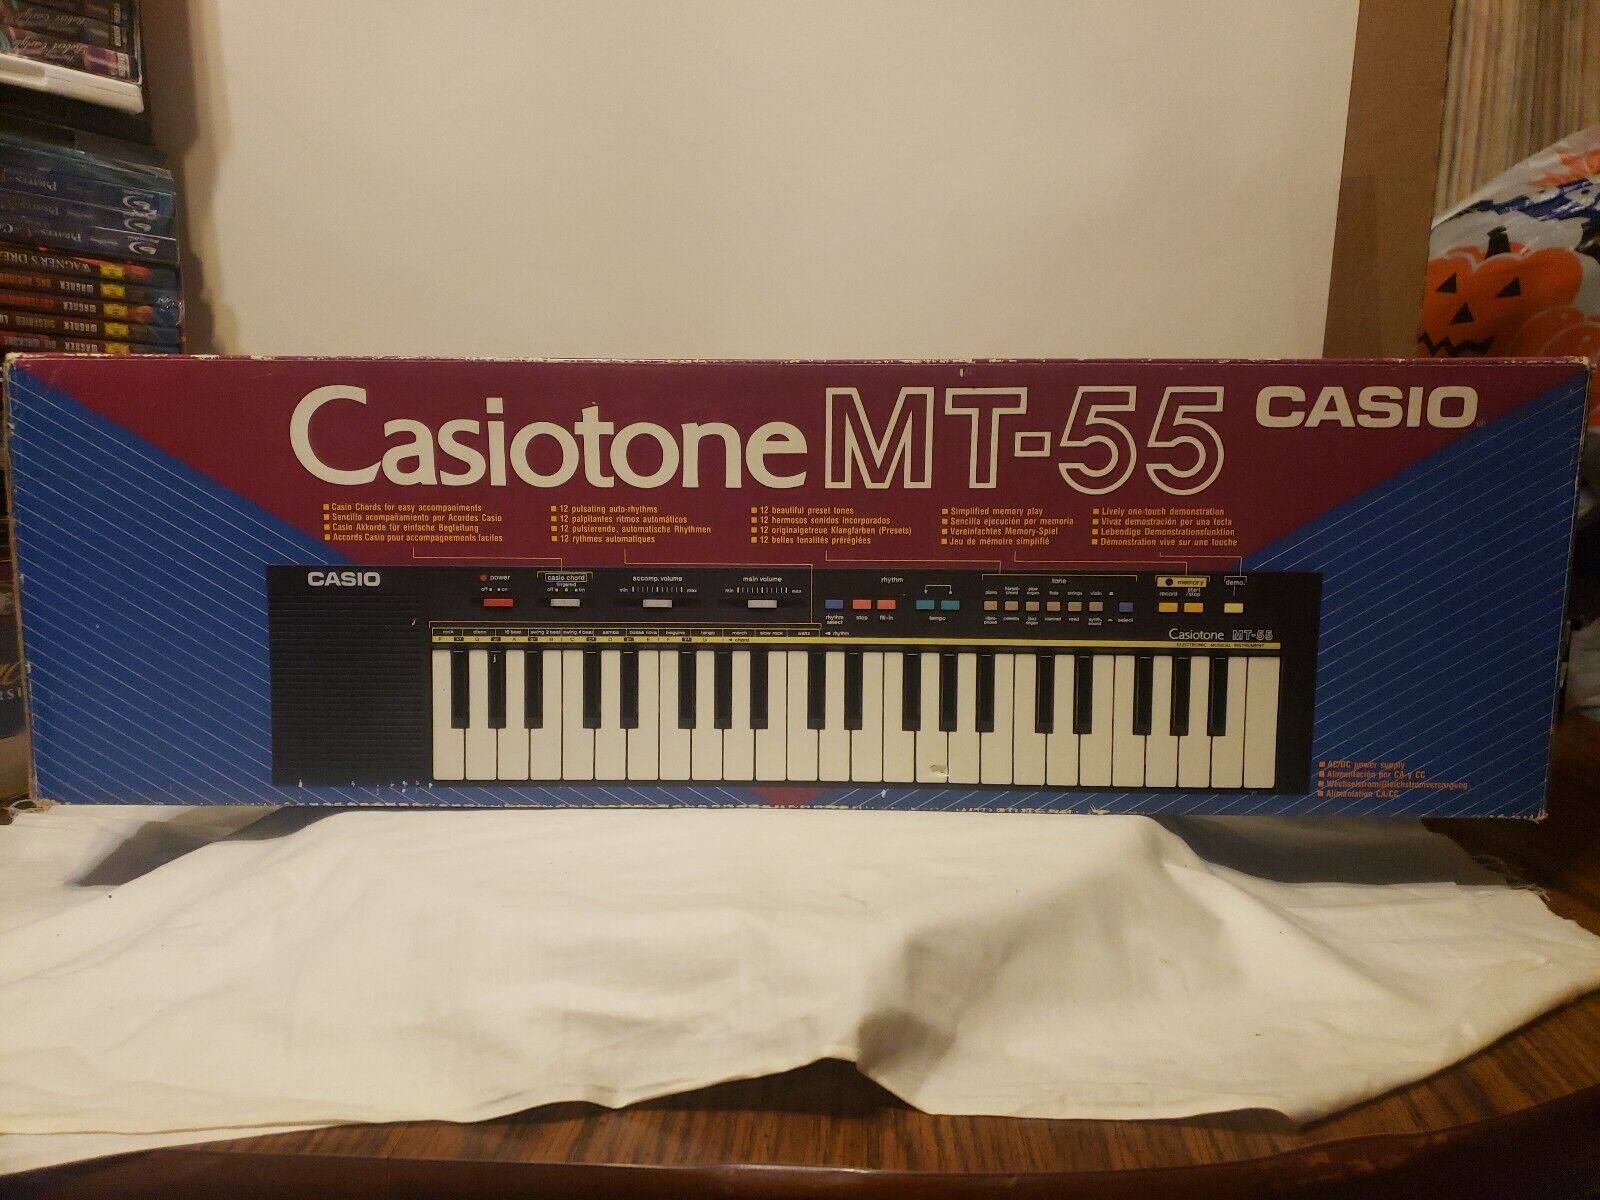 CASIO CASIOTONE Max 50% OFF Max 49% OFF MT-55 KEYBOARD FREE SHIPPING TESTED BOX SU POWER